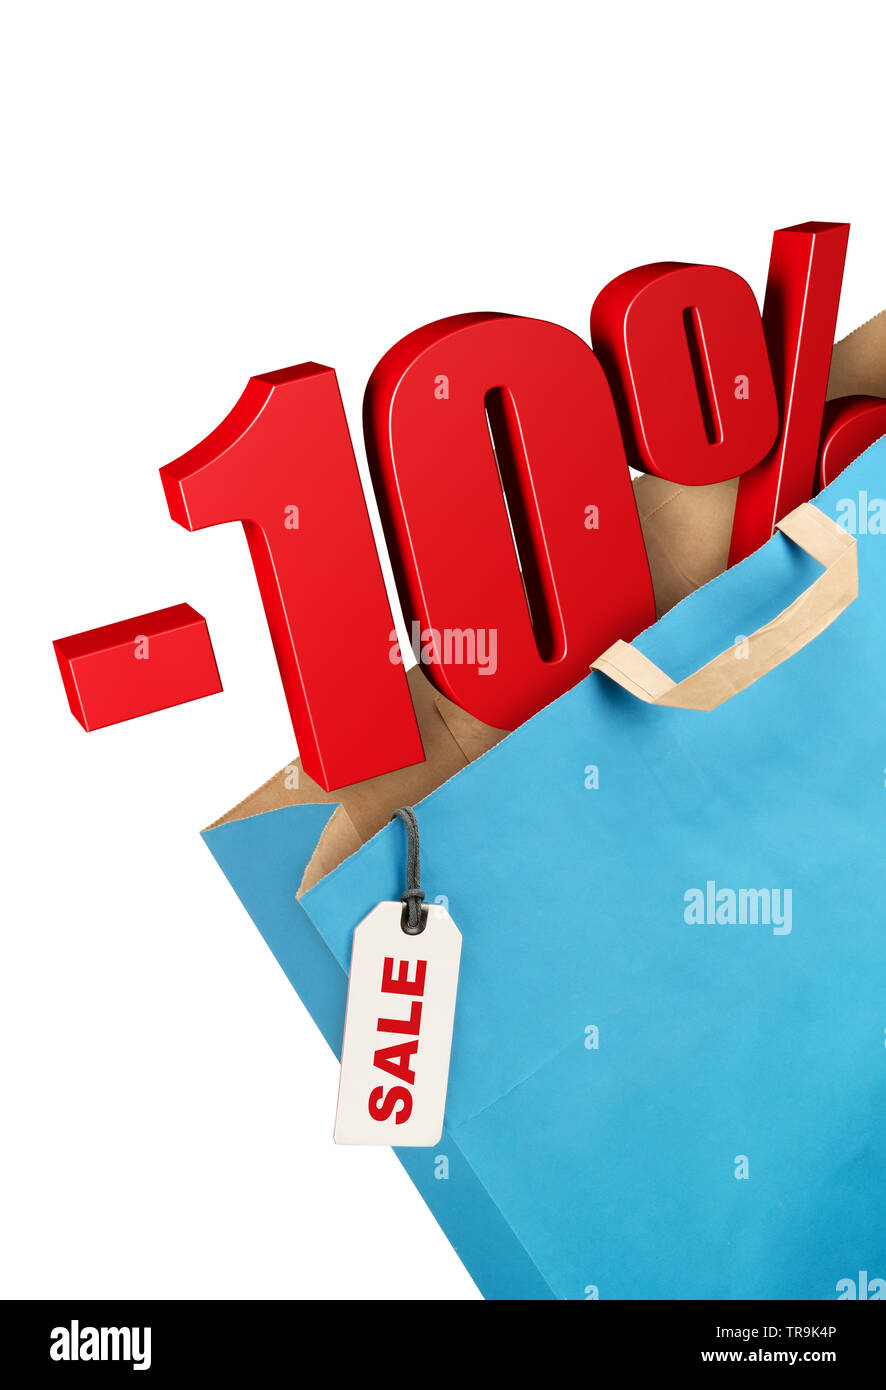 Grocery bag with ten percent symbol. Sale concept. Stock Photo